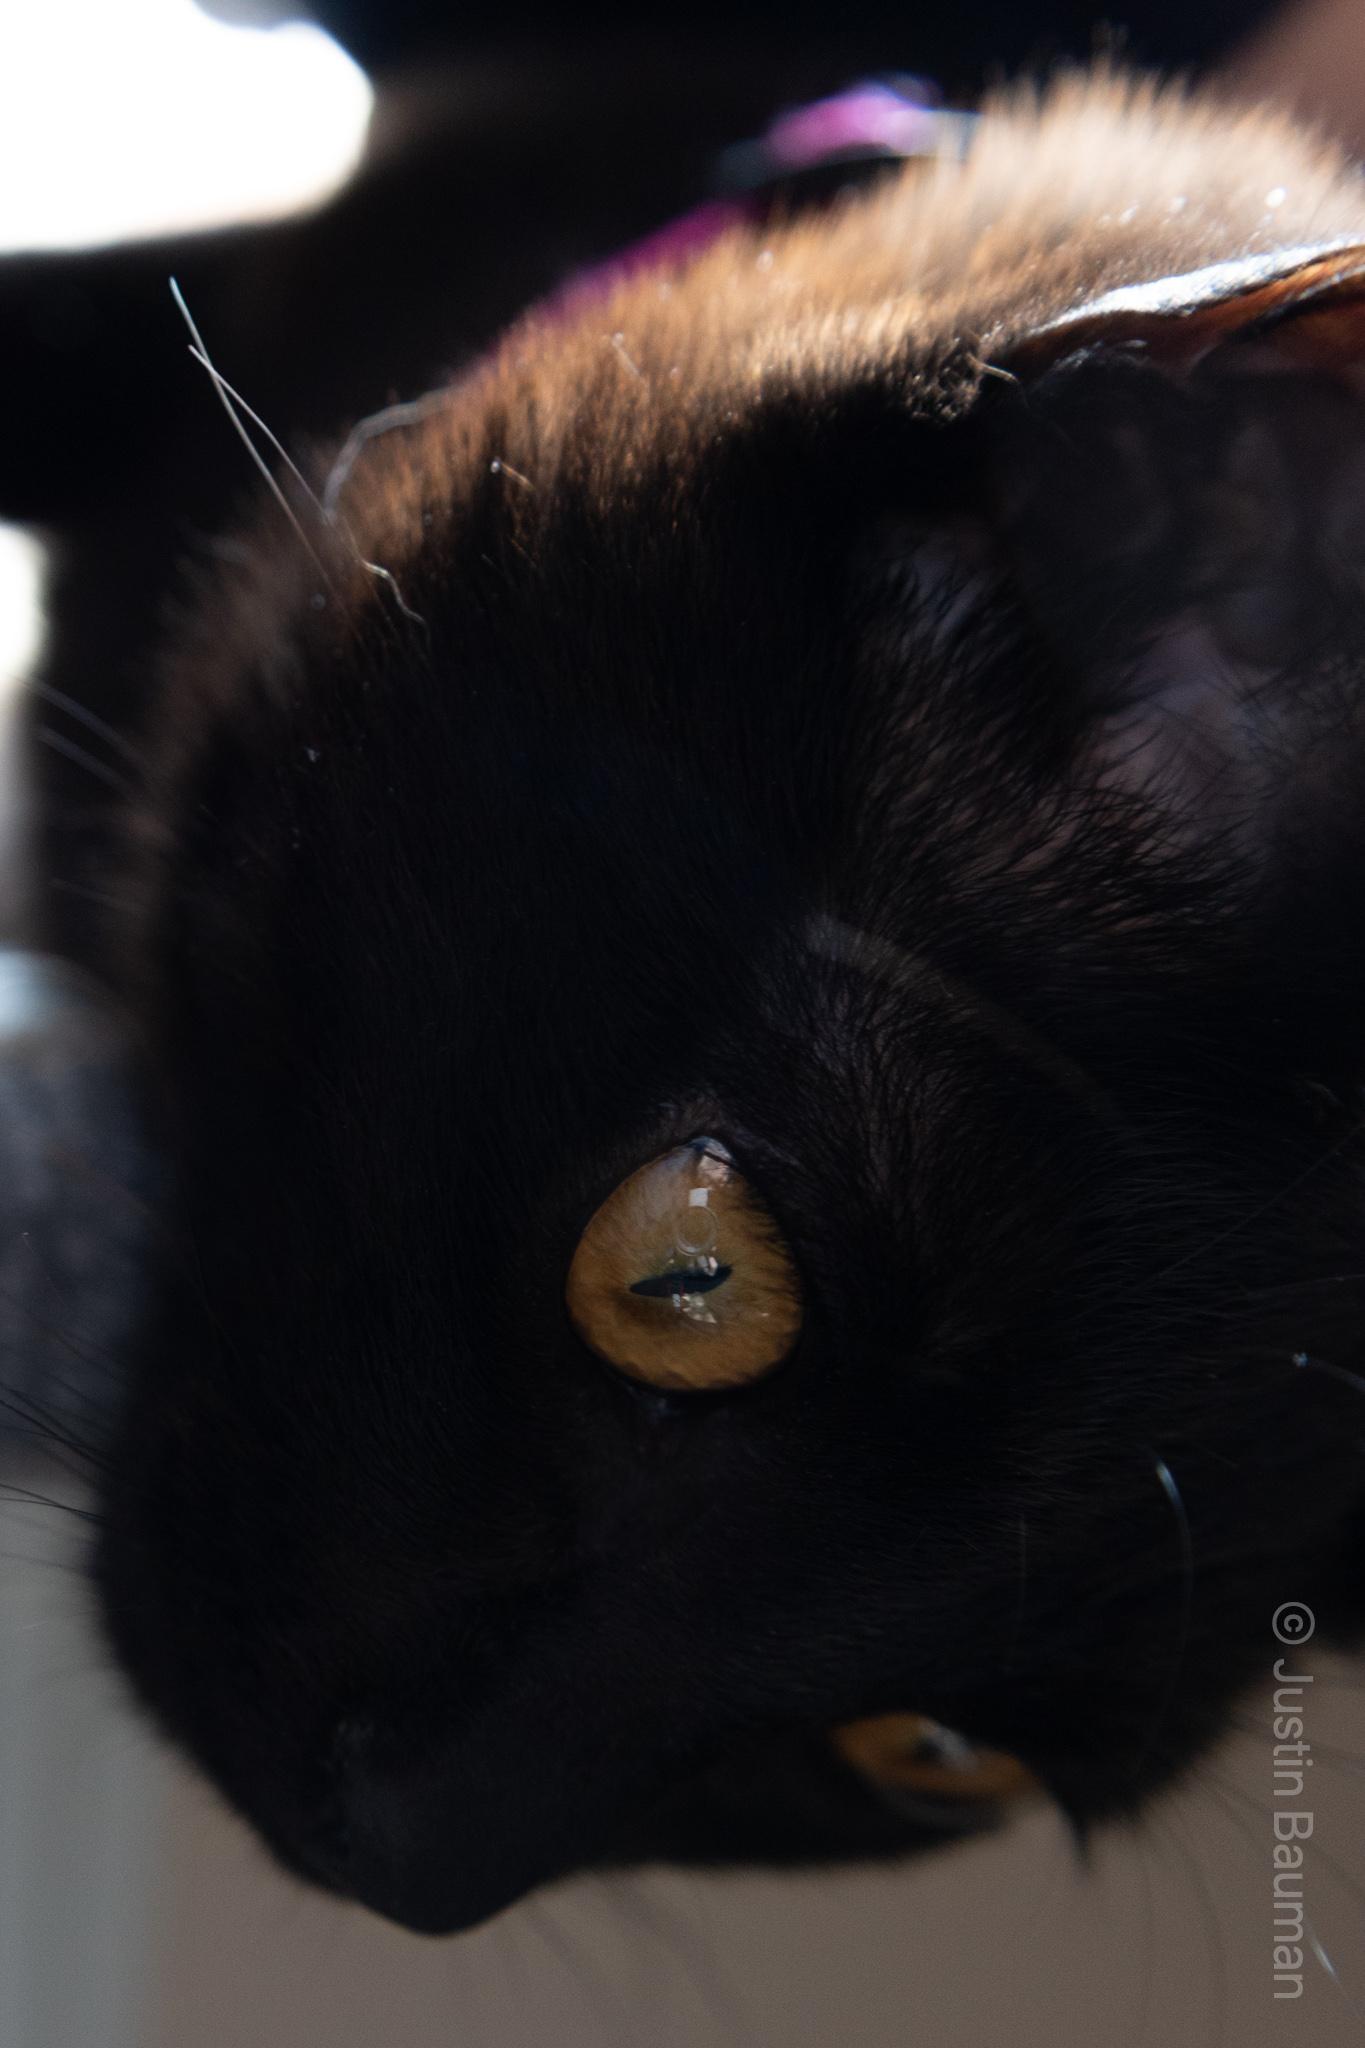 A close up of my cat Luna, showing the details of her eyes.